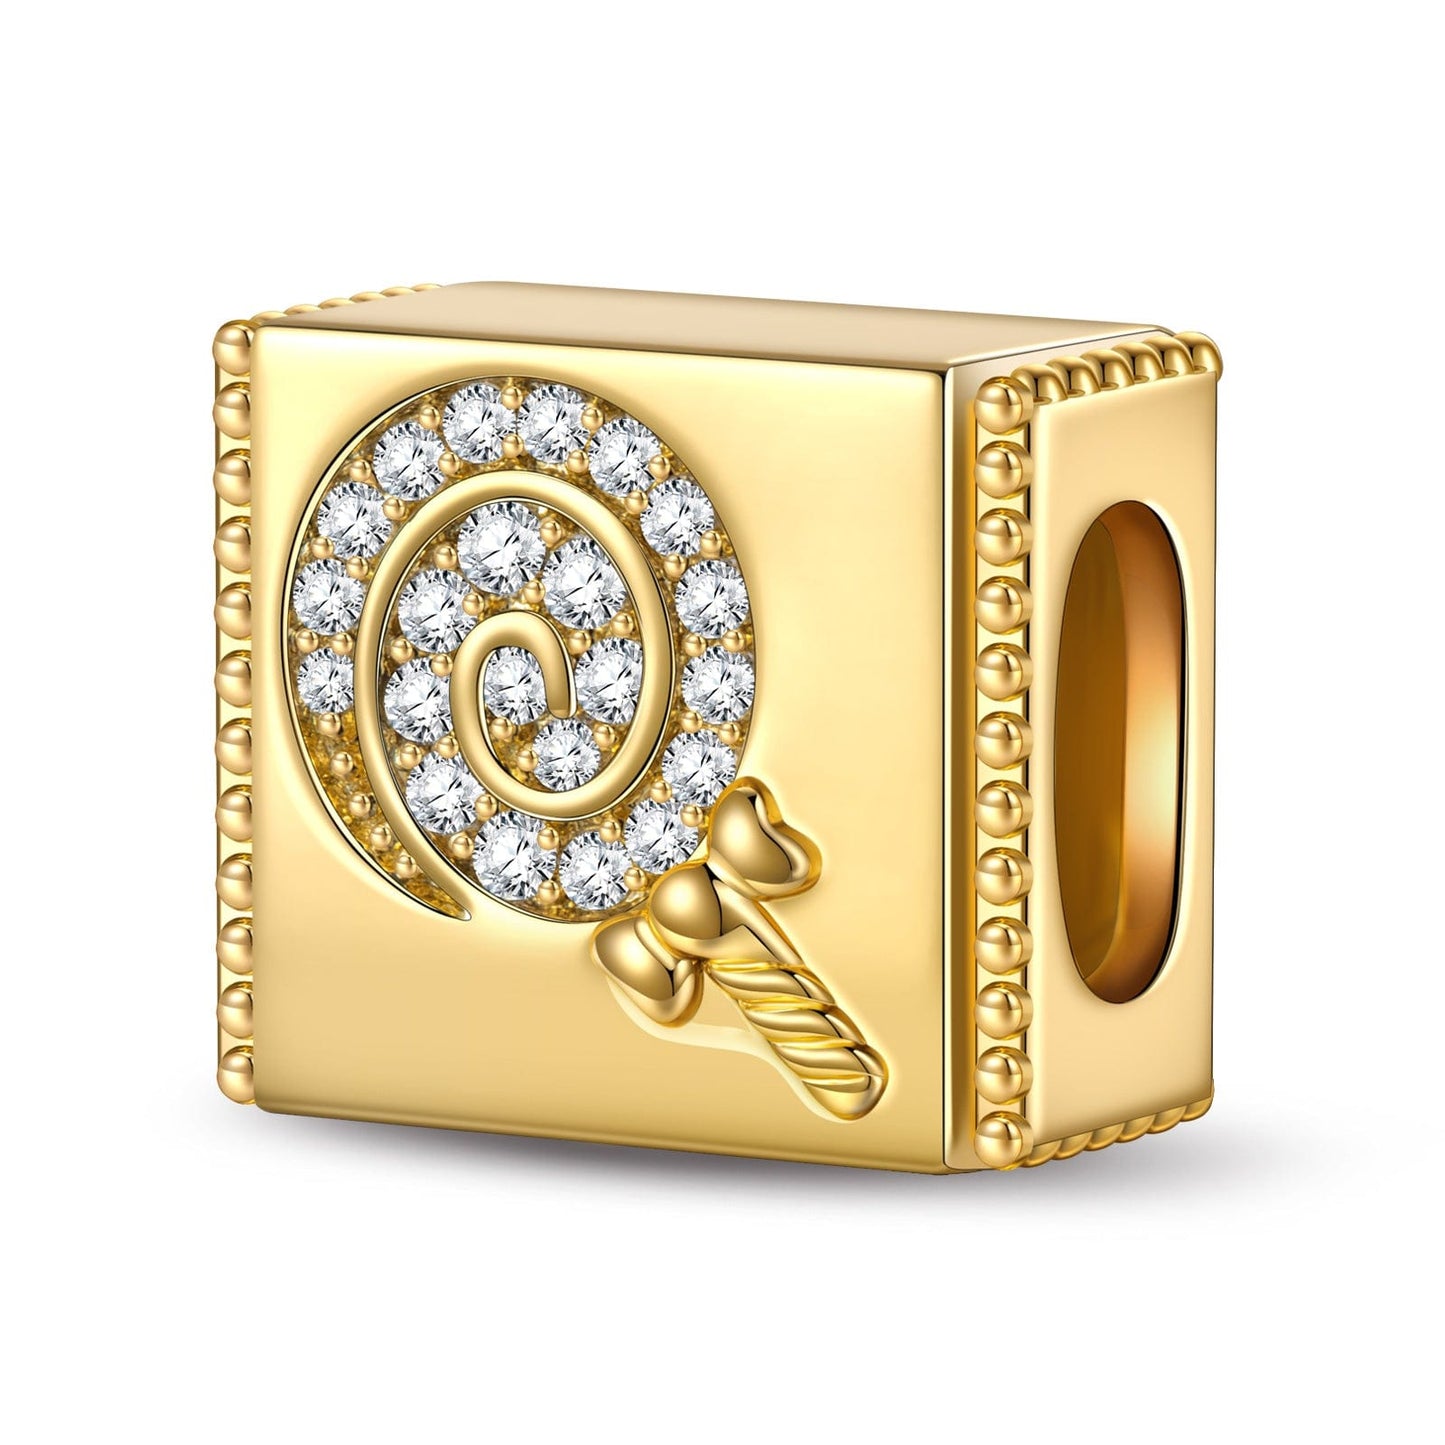 Treat or Trick Tarnish-resistant Silver Rectangular Charms In 14K Gold Plated